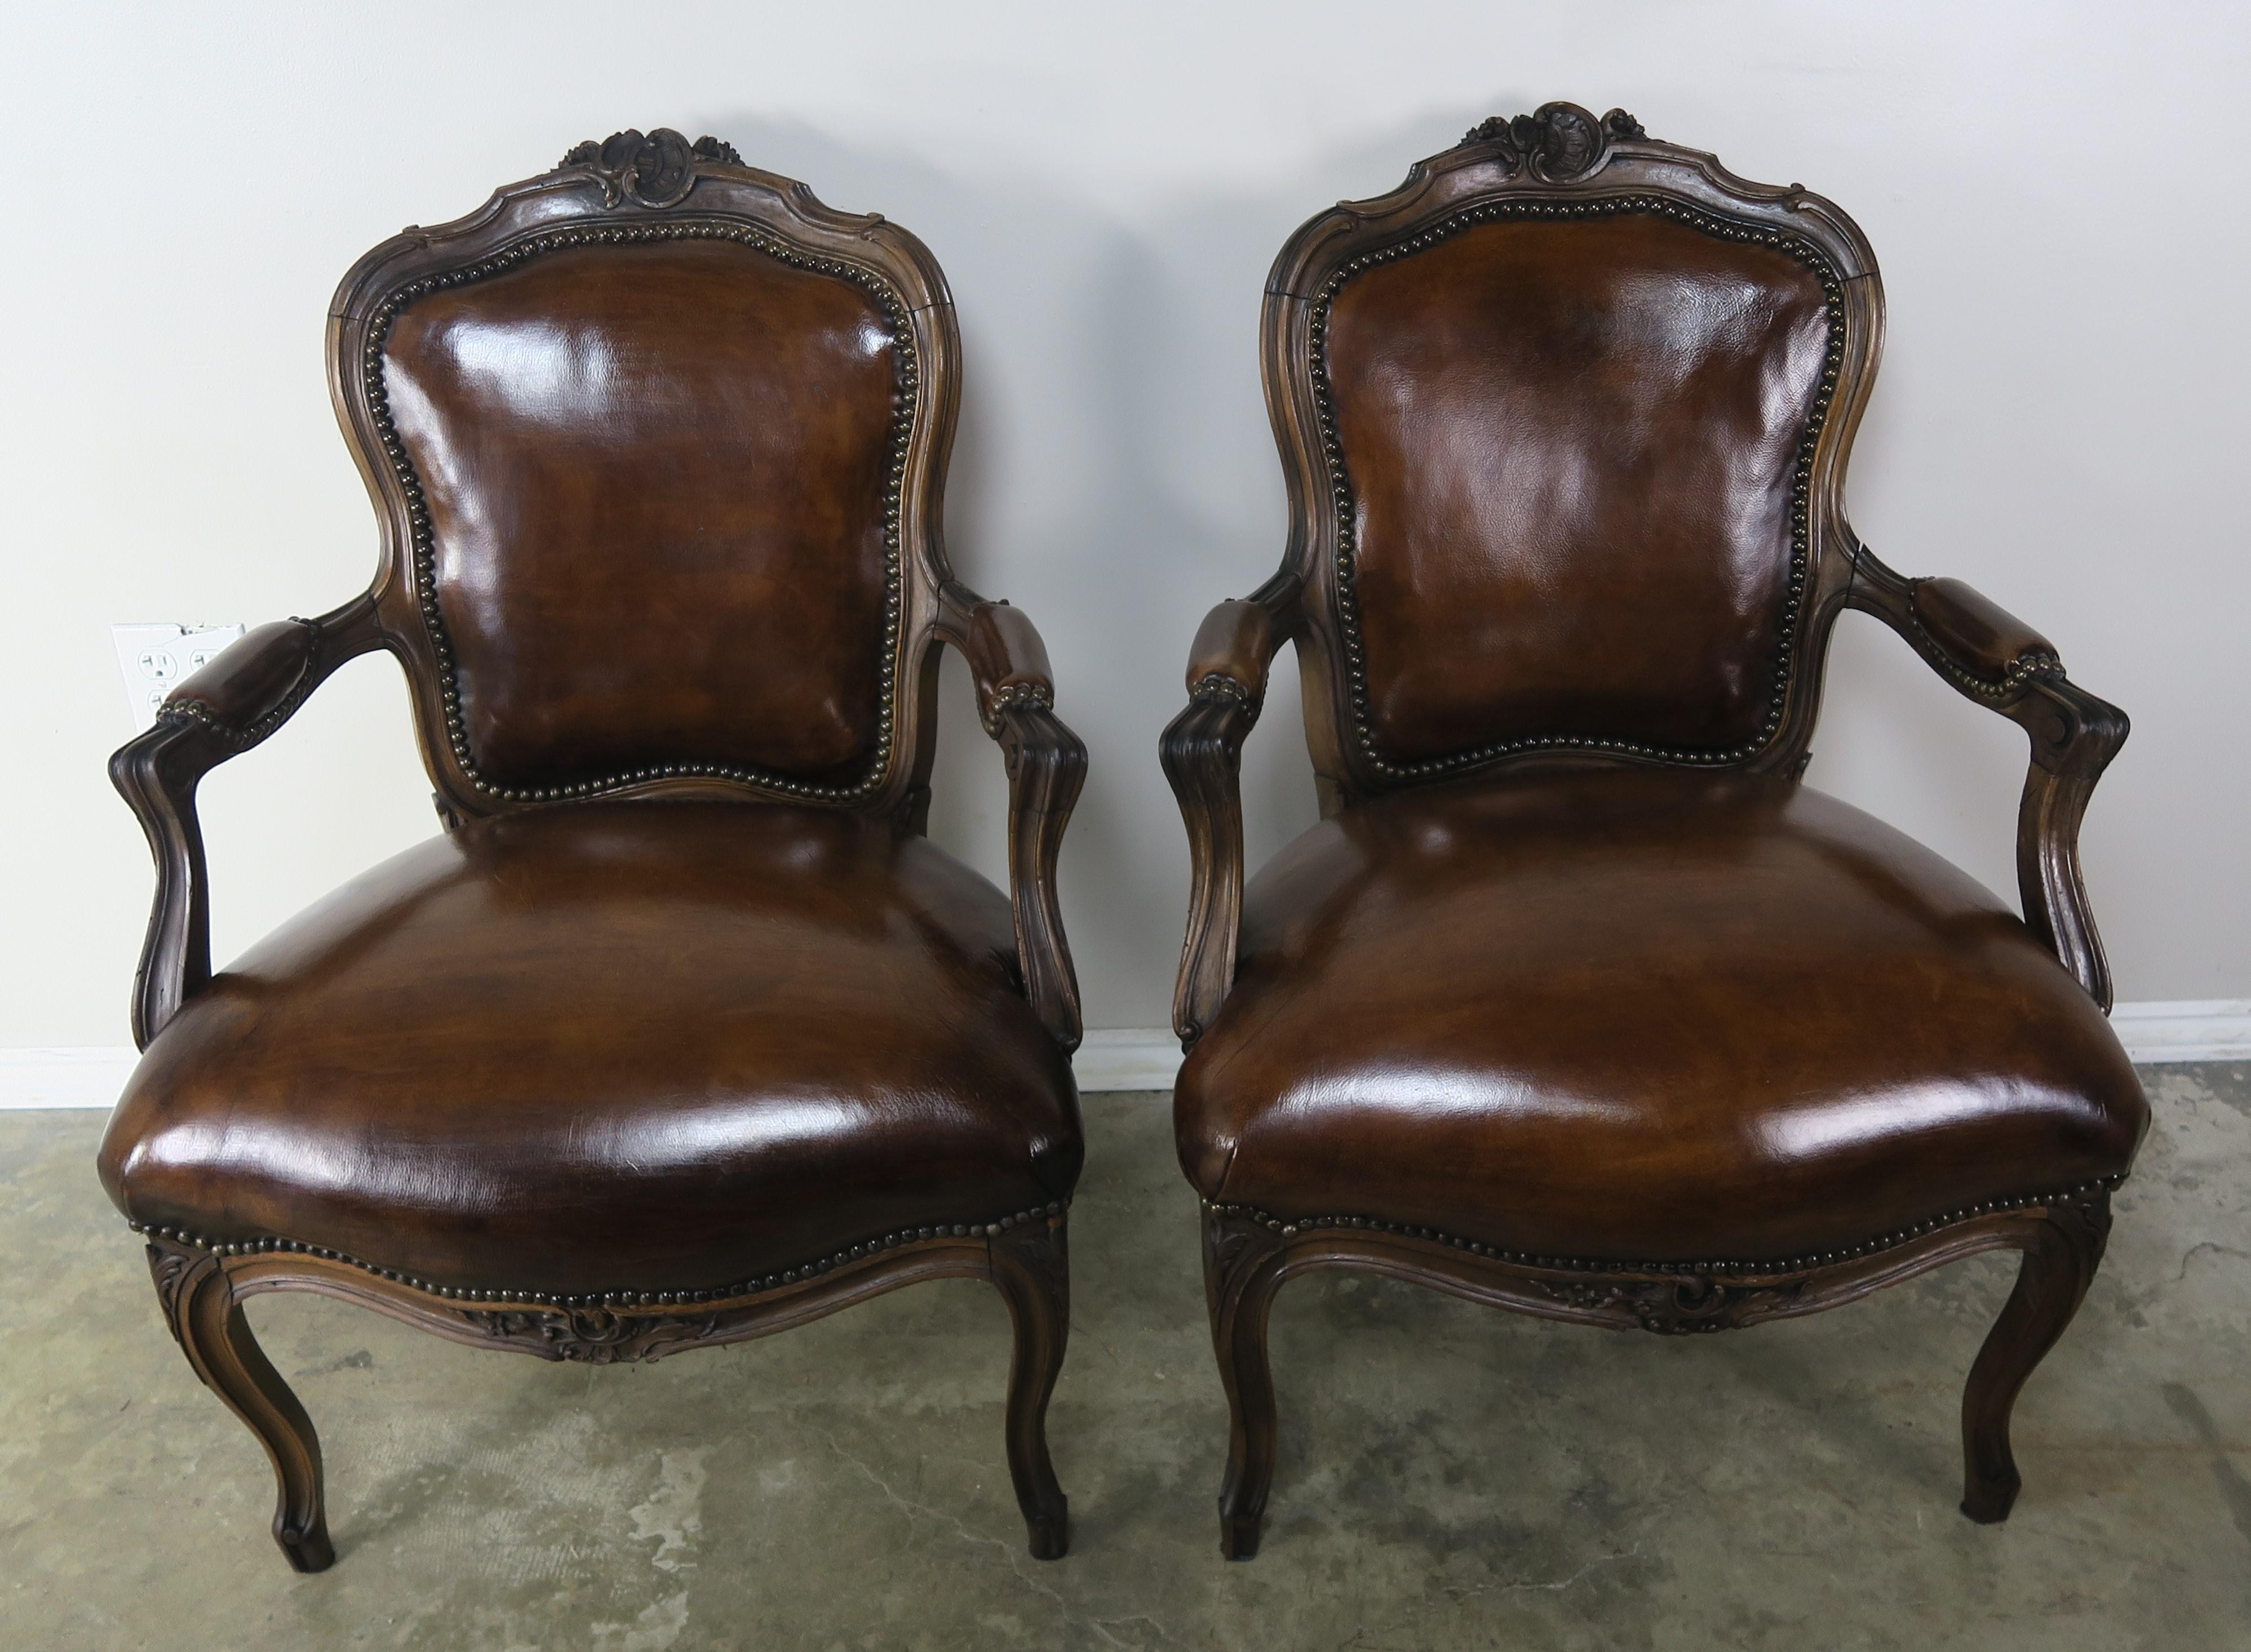 Pair of French carved armchairs standing on four cabriole legs. The chairs are upholstered in rich tabacco colored leather and finished with antique brass colored nailhead trim detail.
Seat height 19